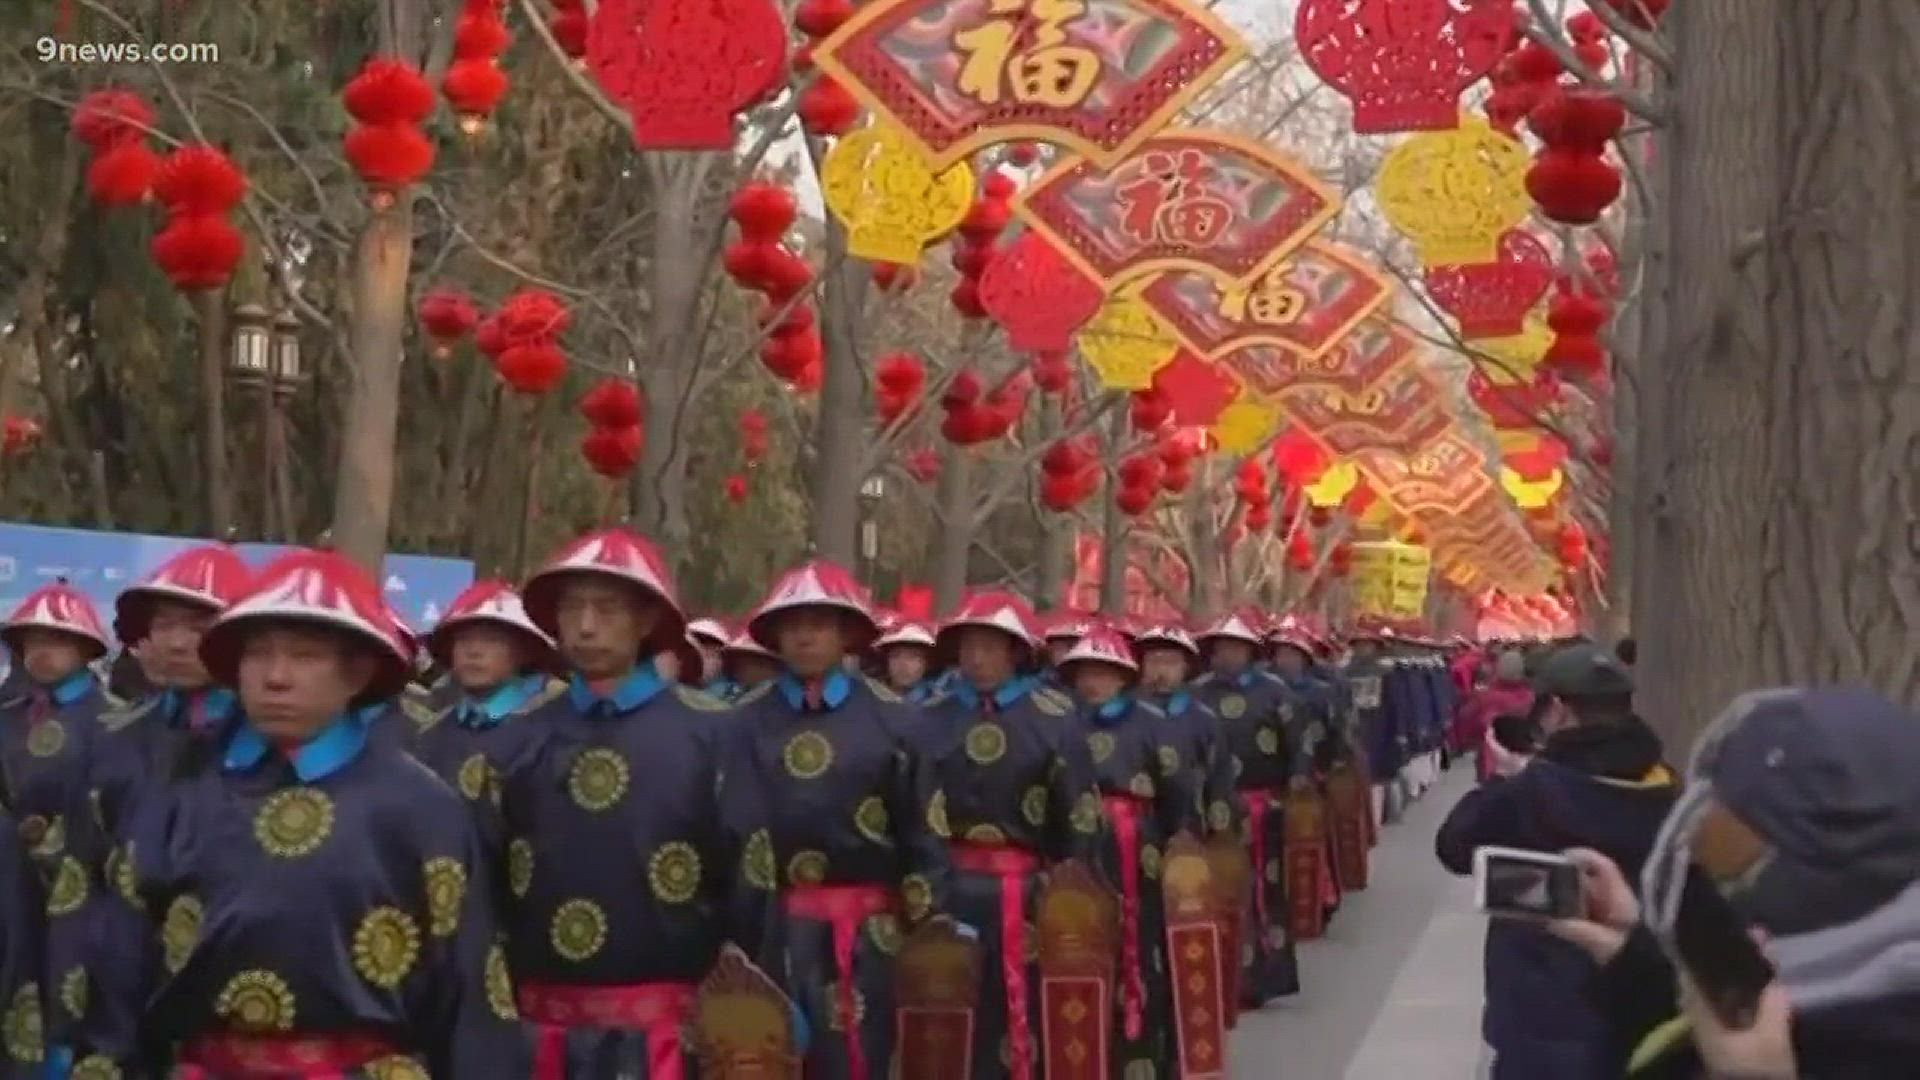 Lunar new year celebrations for the "Year of the Pig" kicked off Tuesday in China. Thousands of people in Beijing watched traditional parades and ceremonies to celebrate.